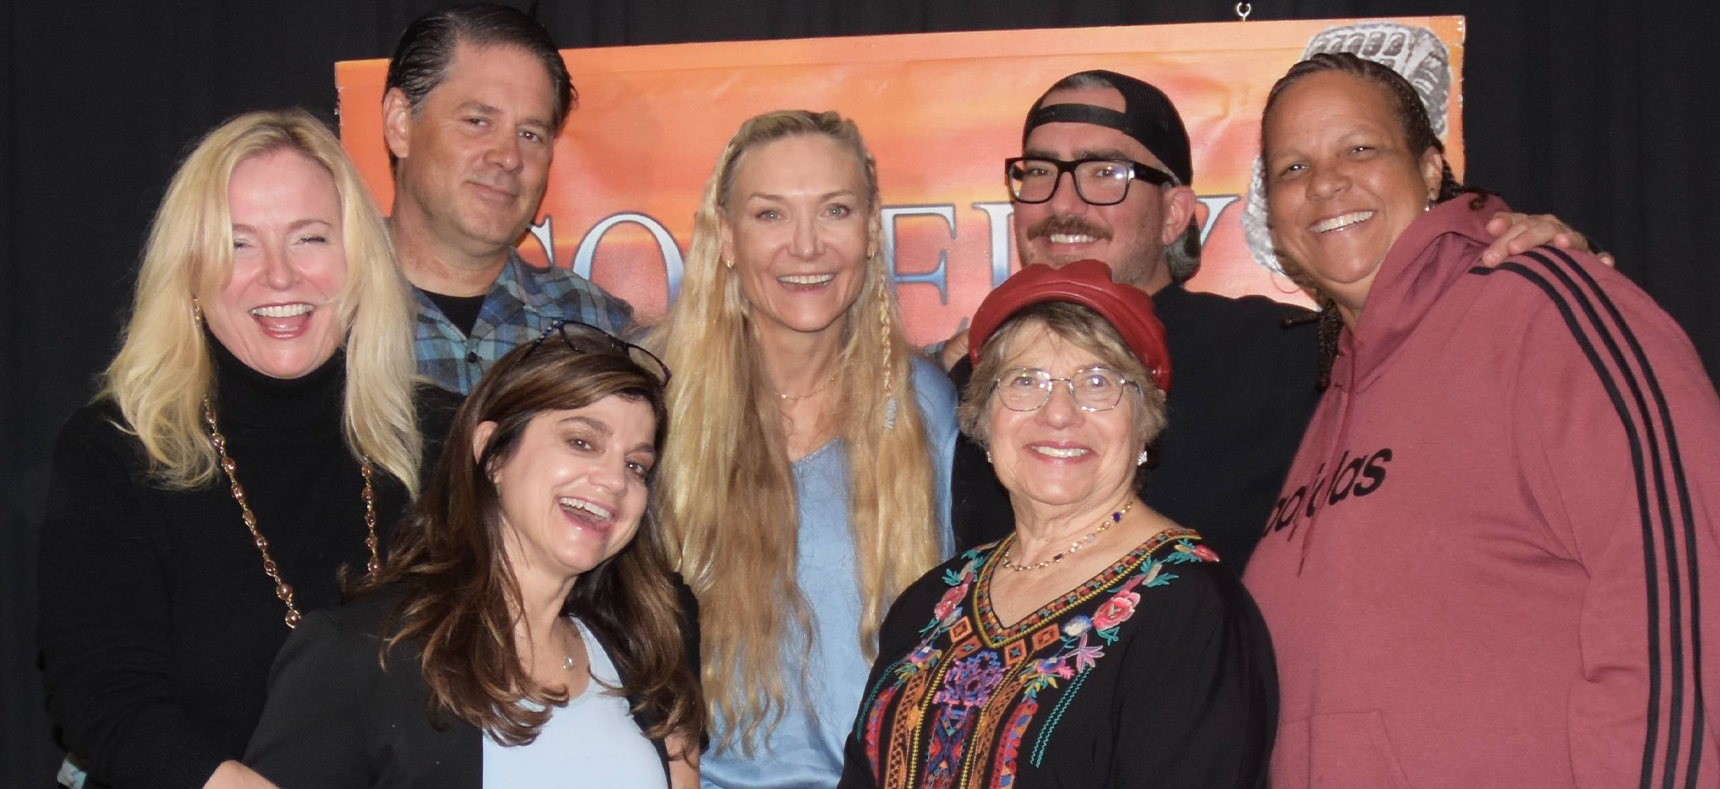 Laura Hayden killed it all weekend long at Comedy Heights at Bay Bridge Brewing and Twiggs.